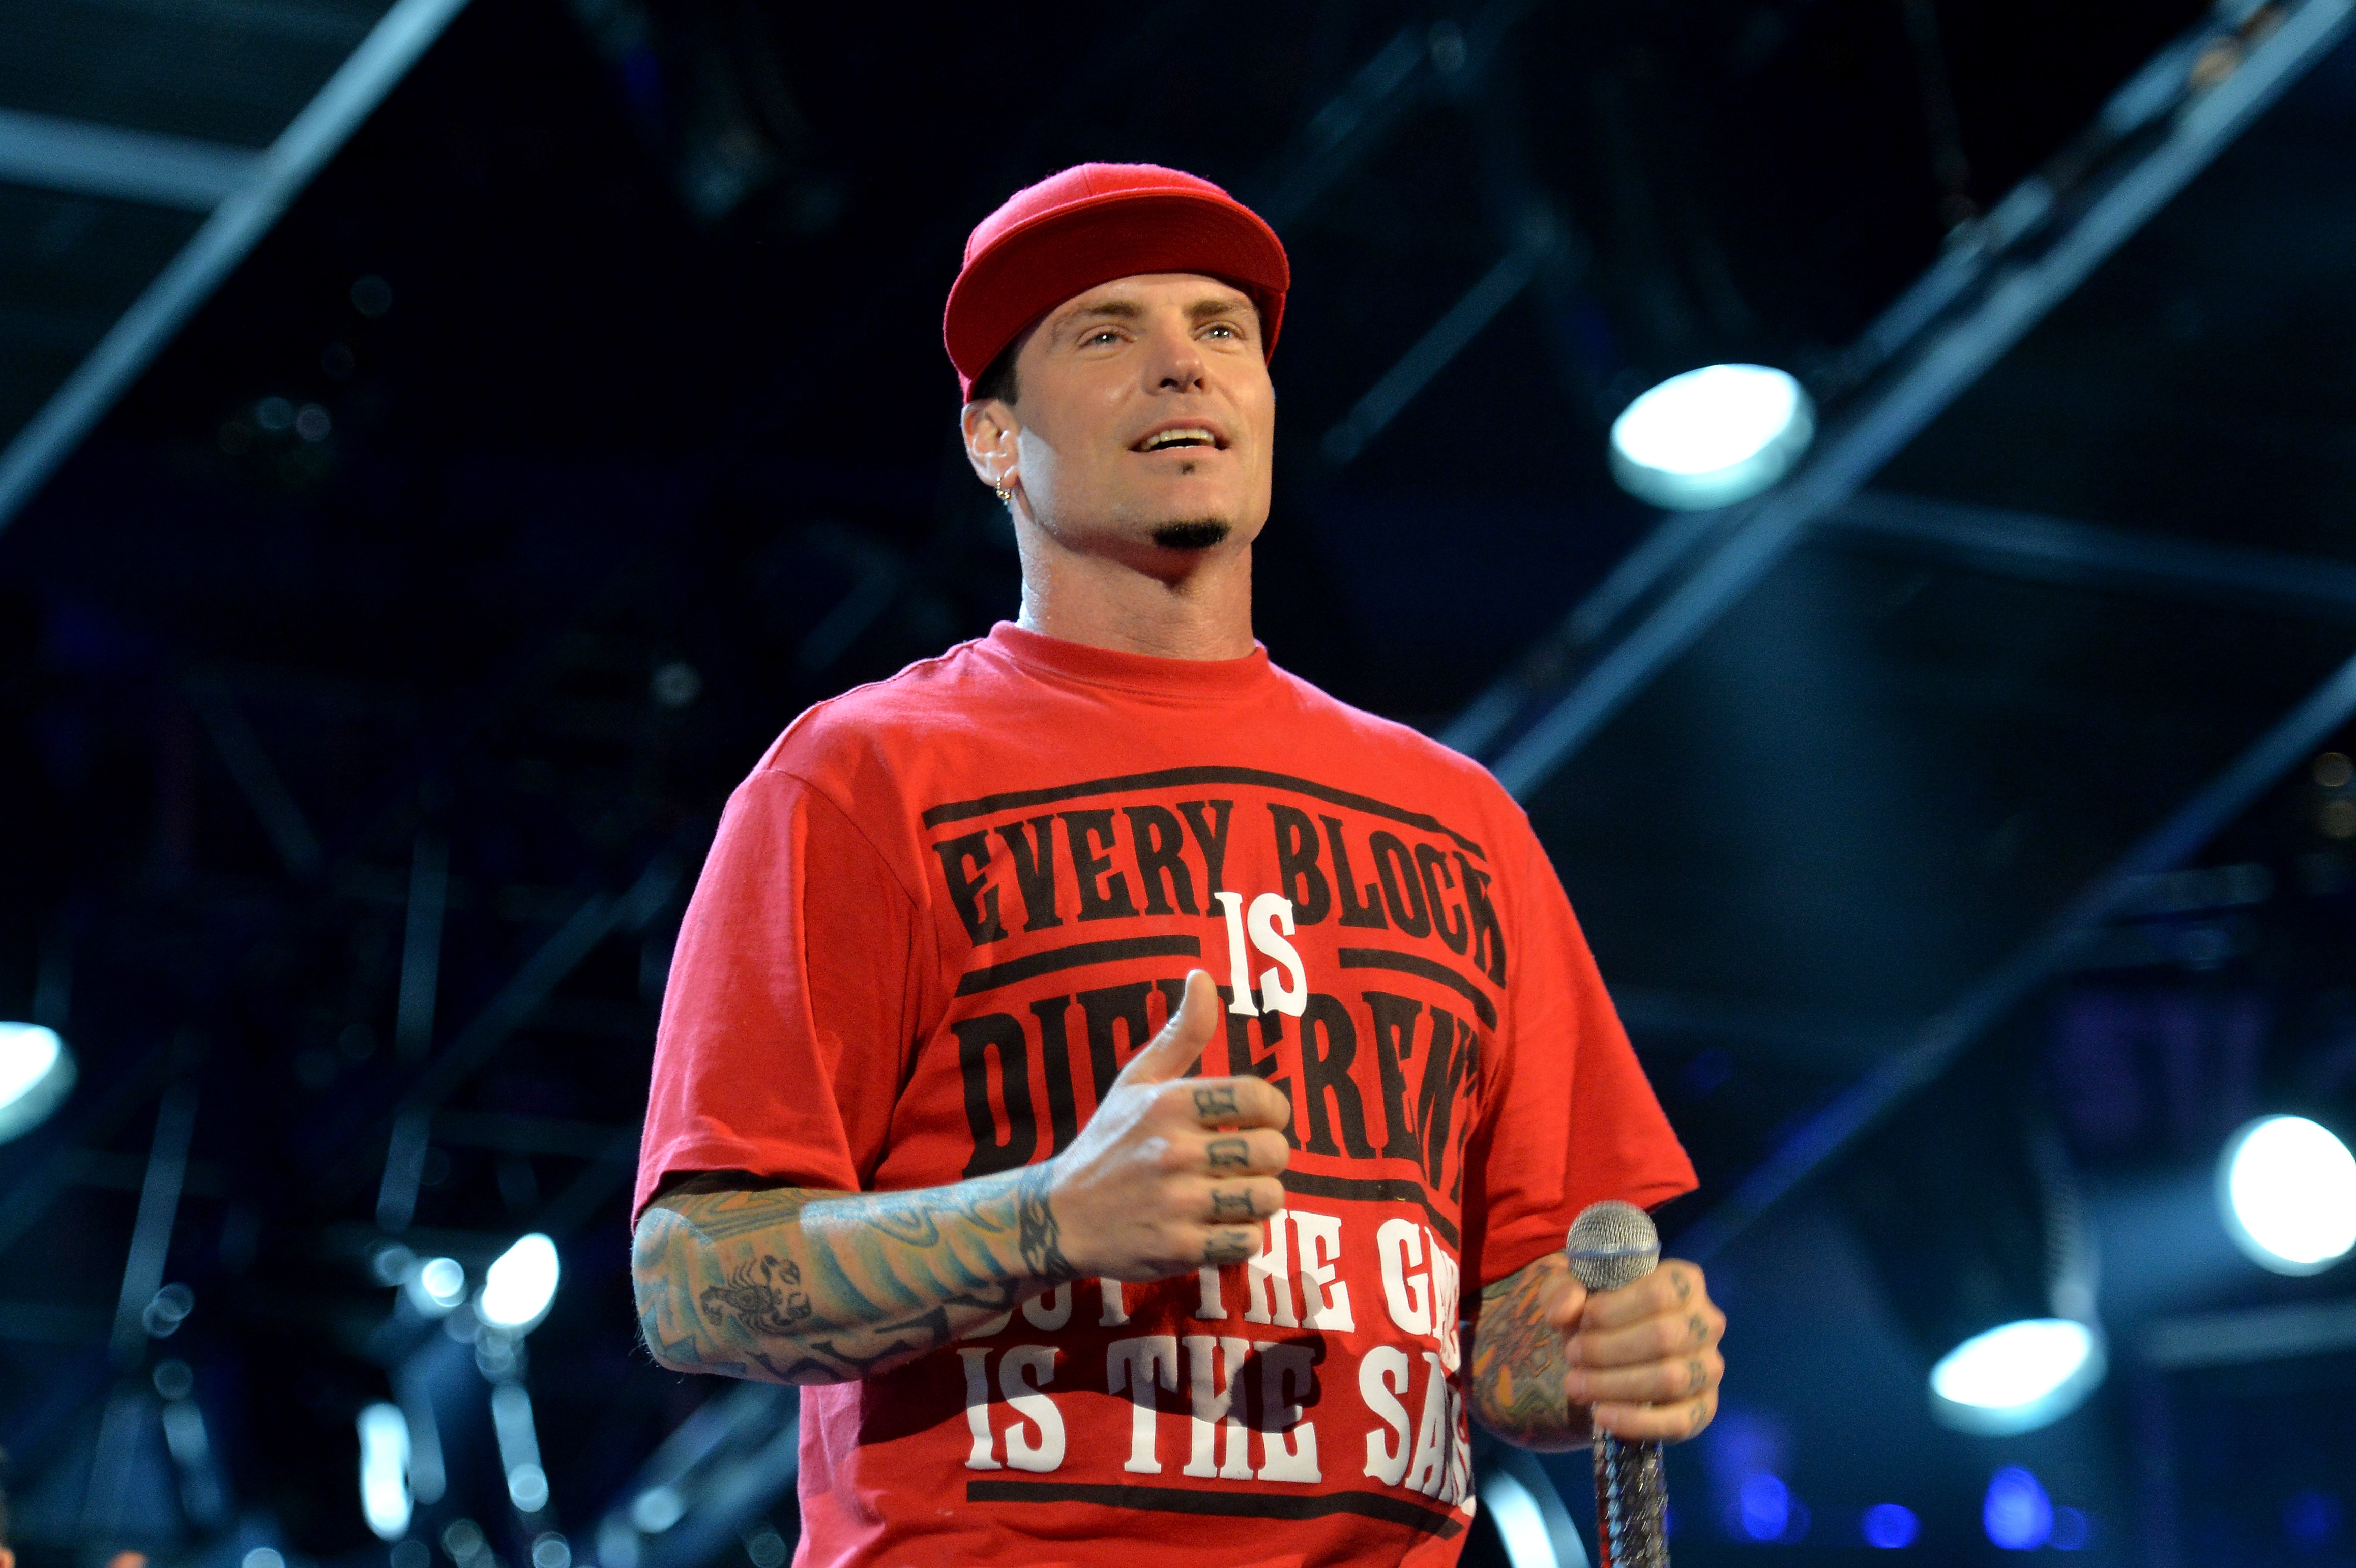 Vanilla Ice Calls 1990s The Greatest Decade, Says Computers & iPhone Destroyed Pop Culture